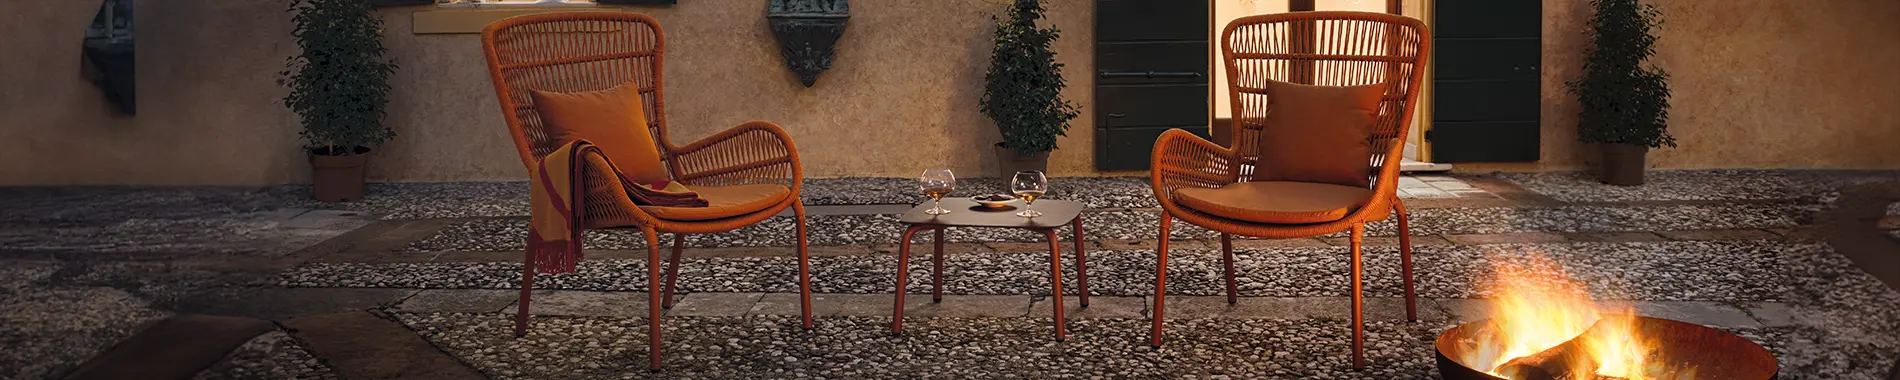 Outdoor furniture from the collection: Leaf